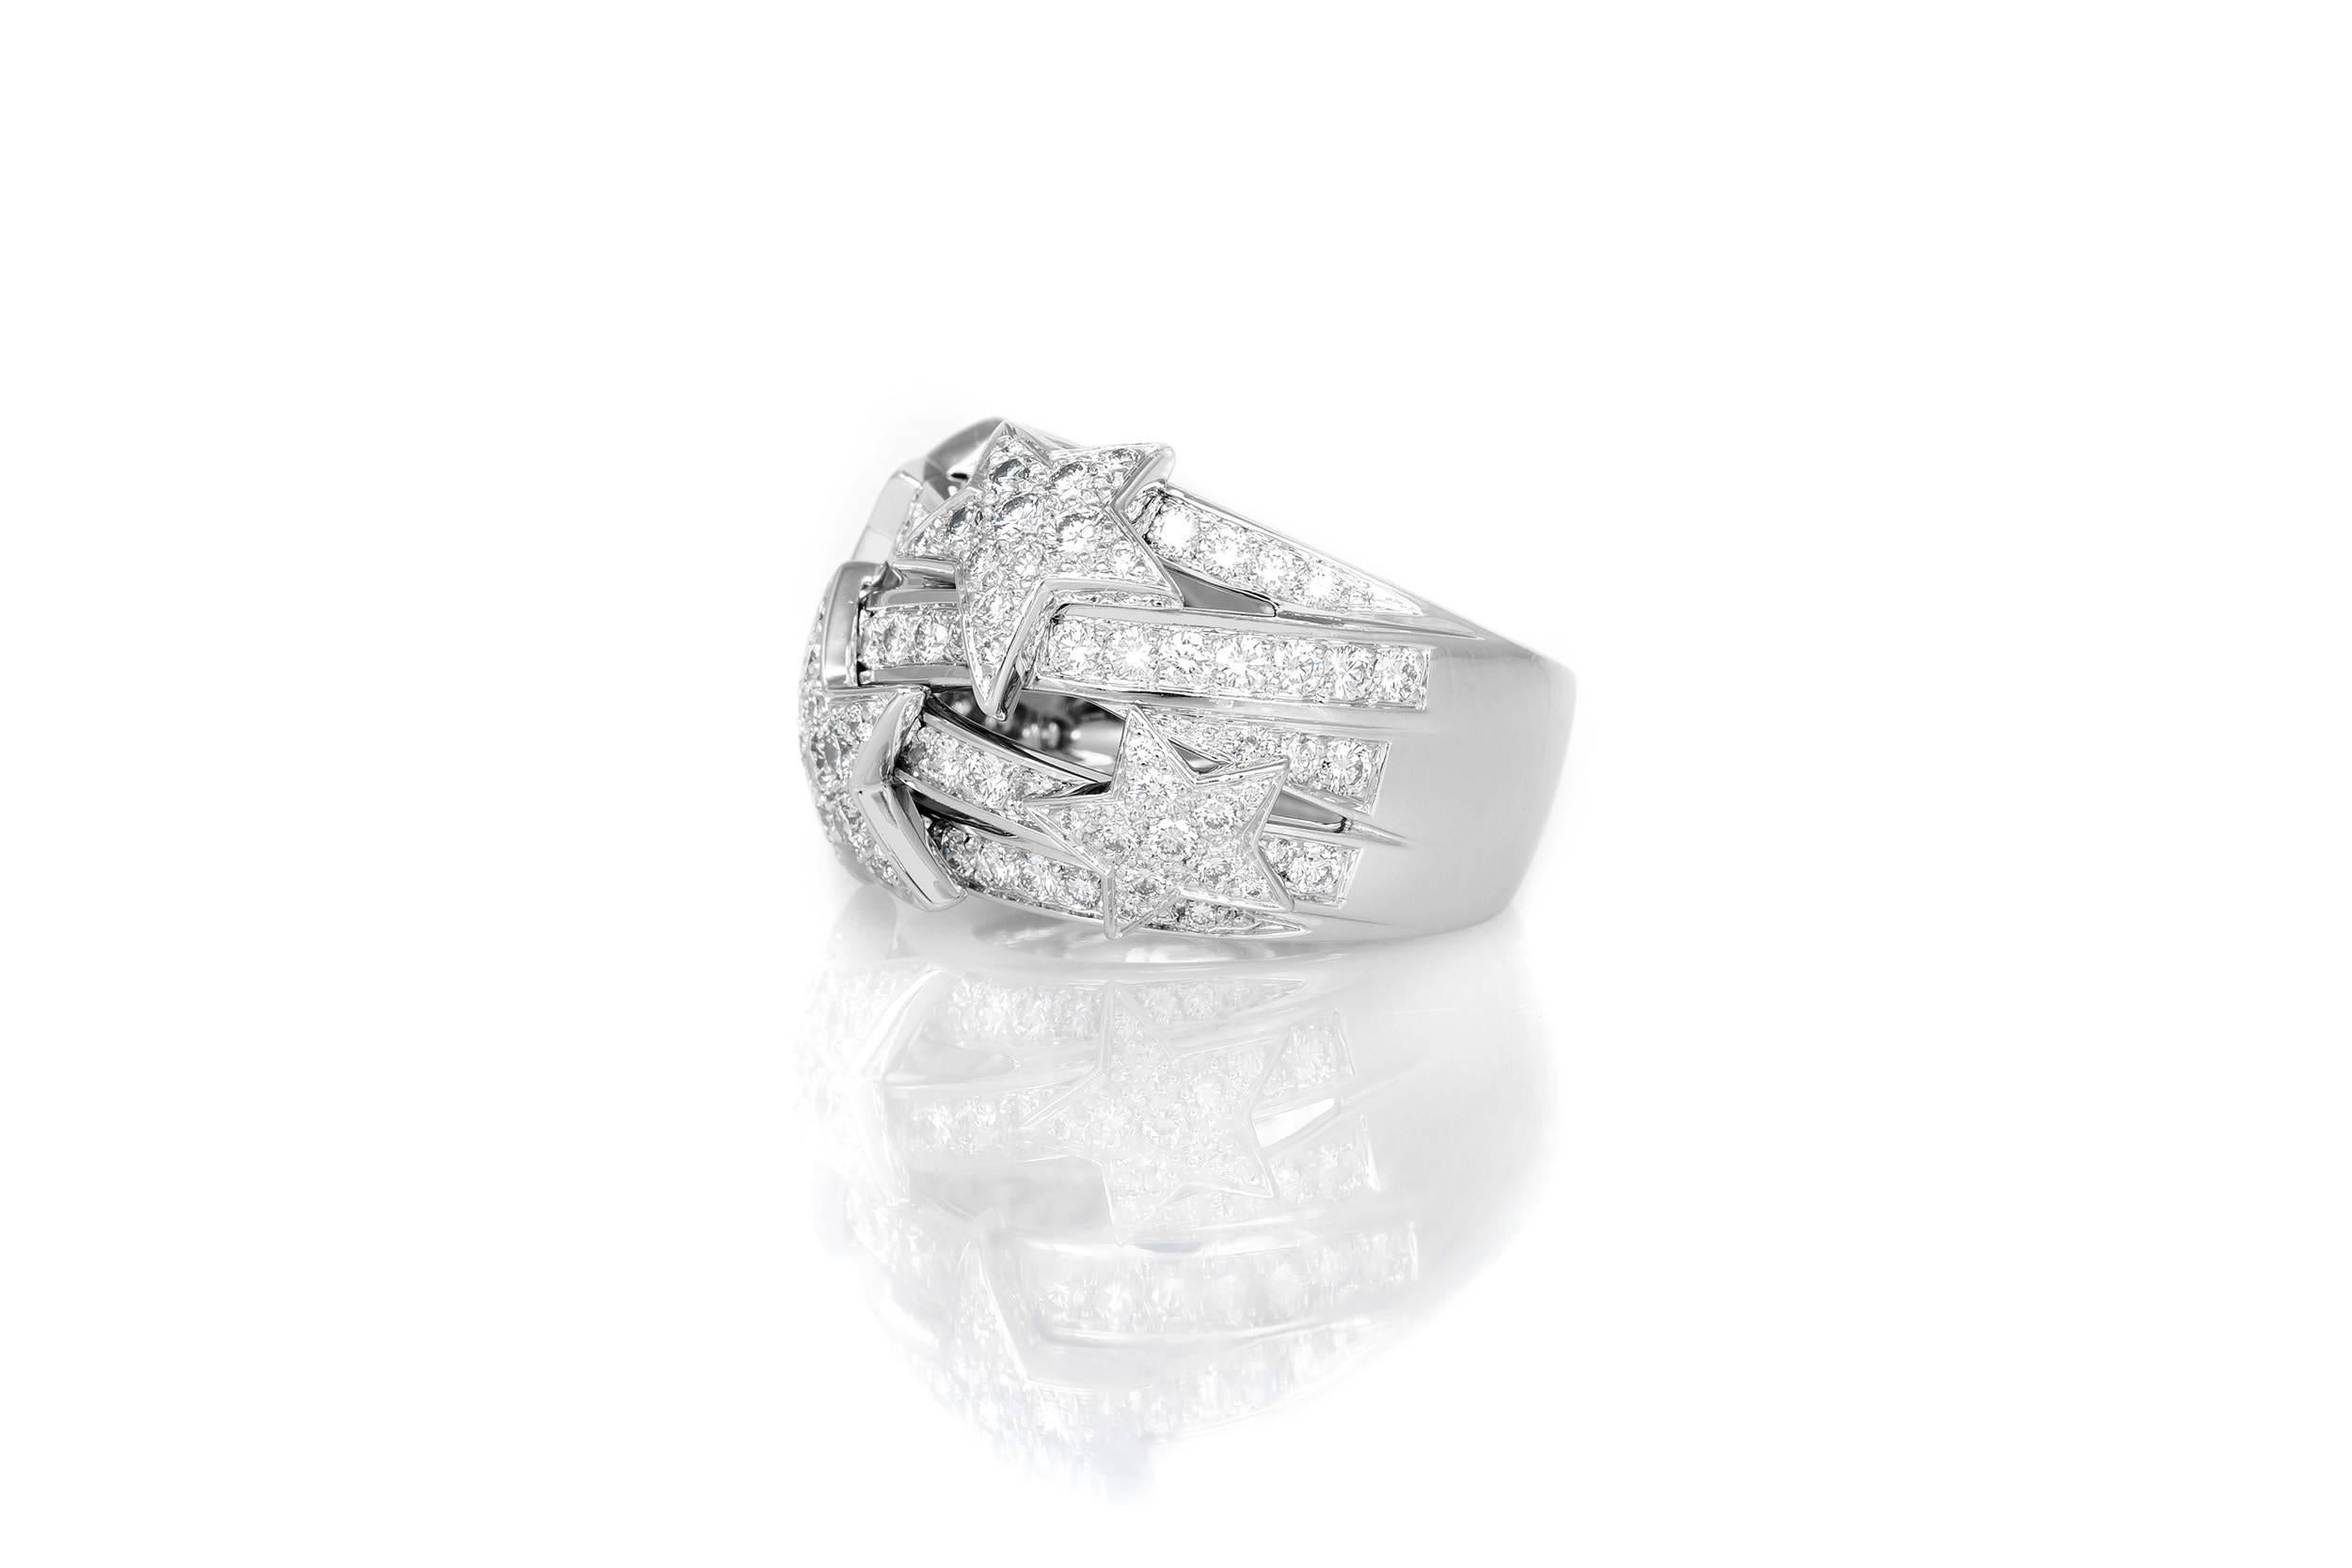 Finely crafted in 18k white gold with Round Brilliant cut Diamonds weighing approximately a total of 2.00 carats.
Signed by Chanel
From their Comète collection
Circa 2000s
Size 5 1/2